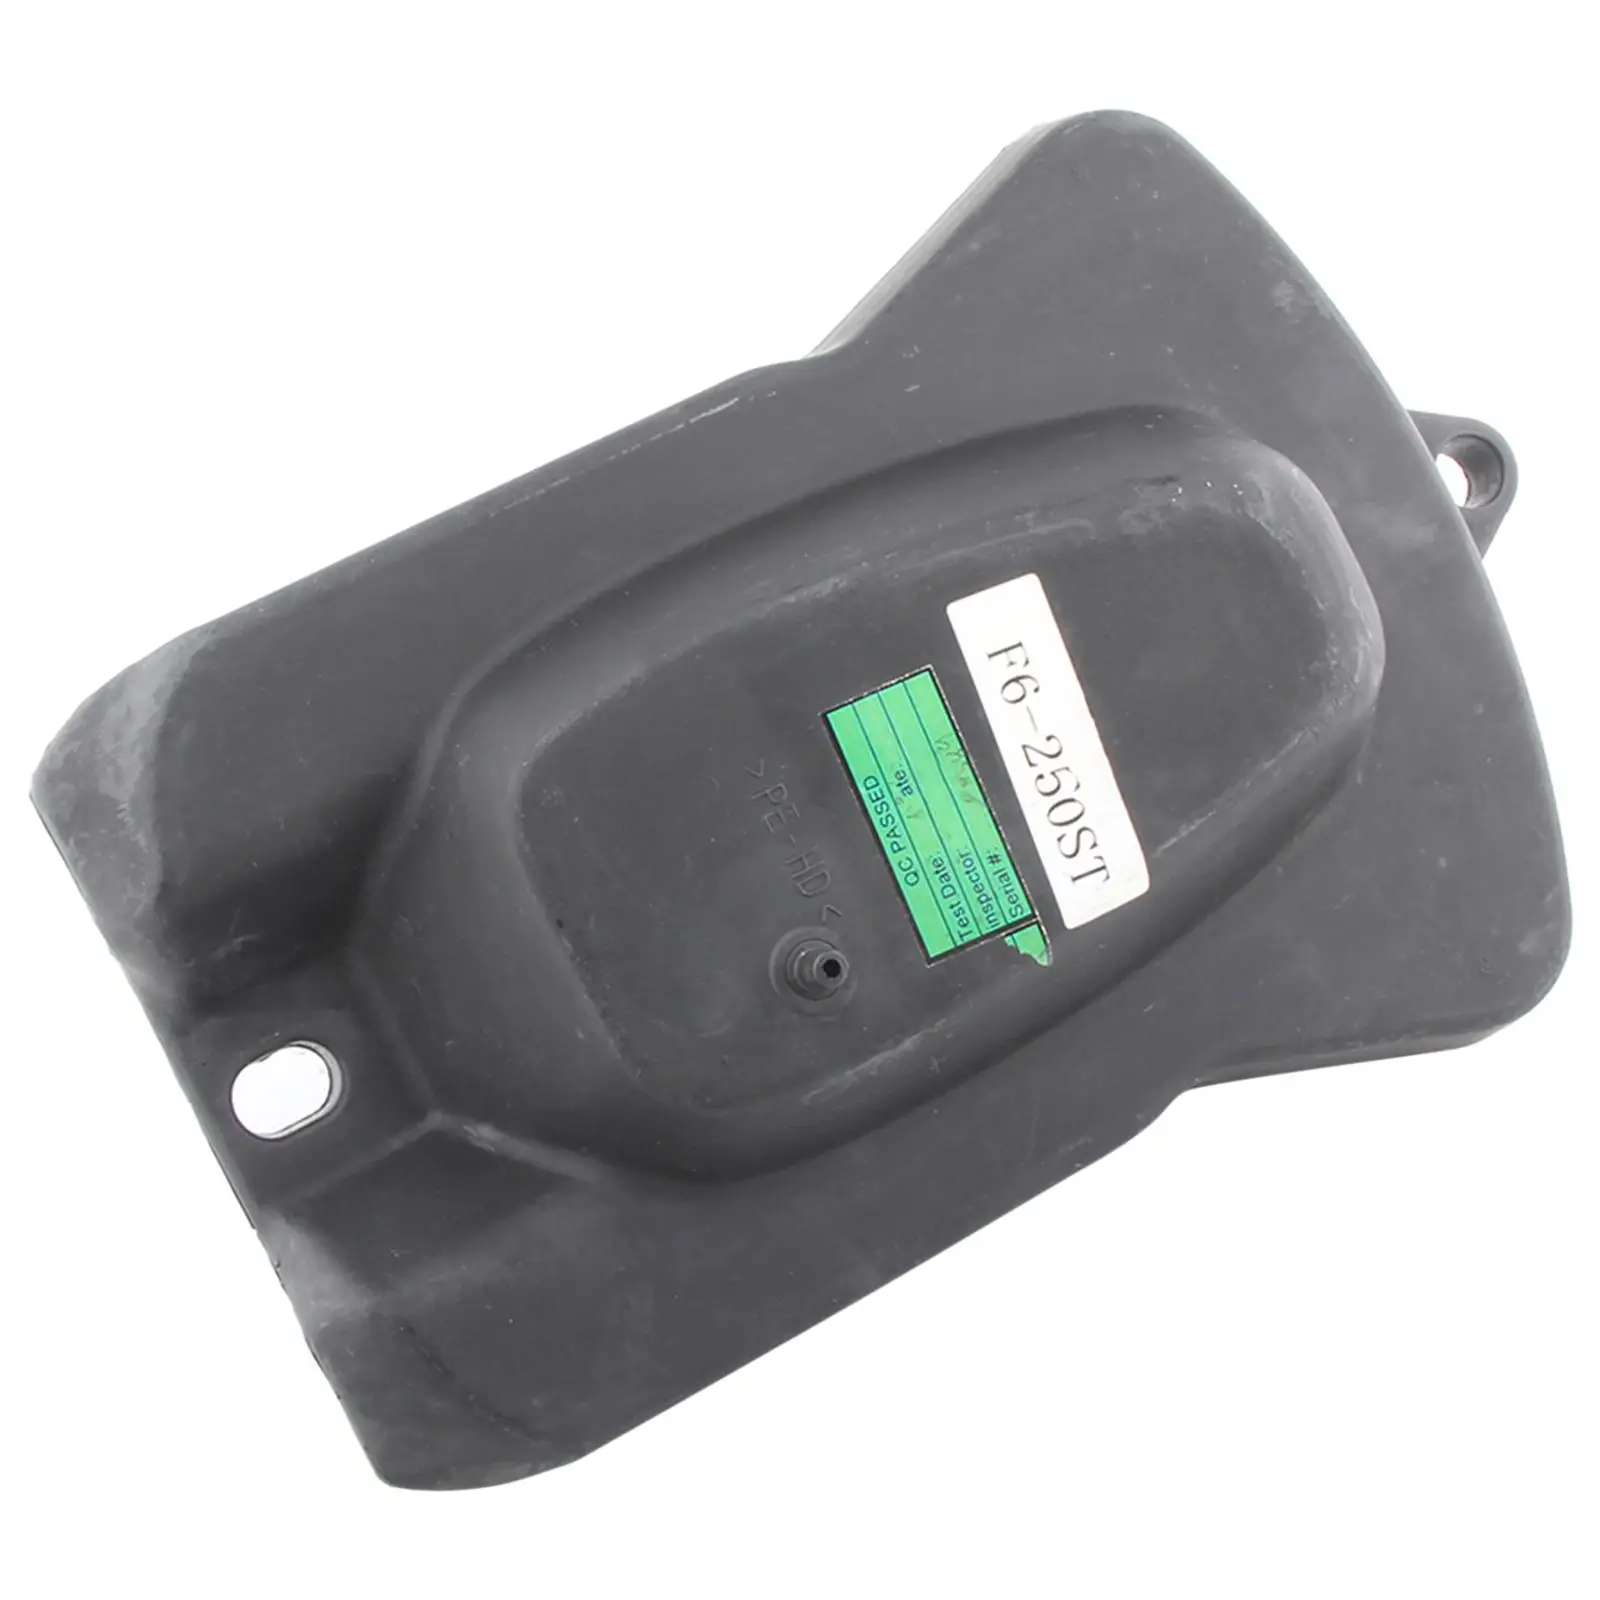 Fuel Tank Bbr Fits for Kawasaki 70 90 110 140cc Replacement Modification